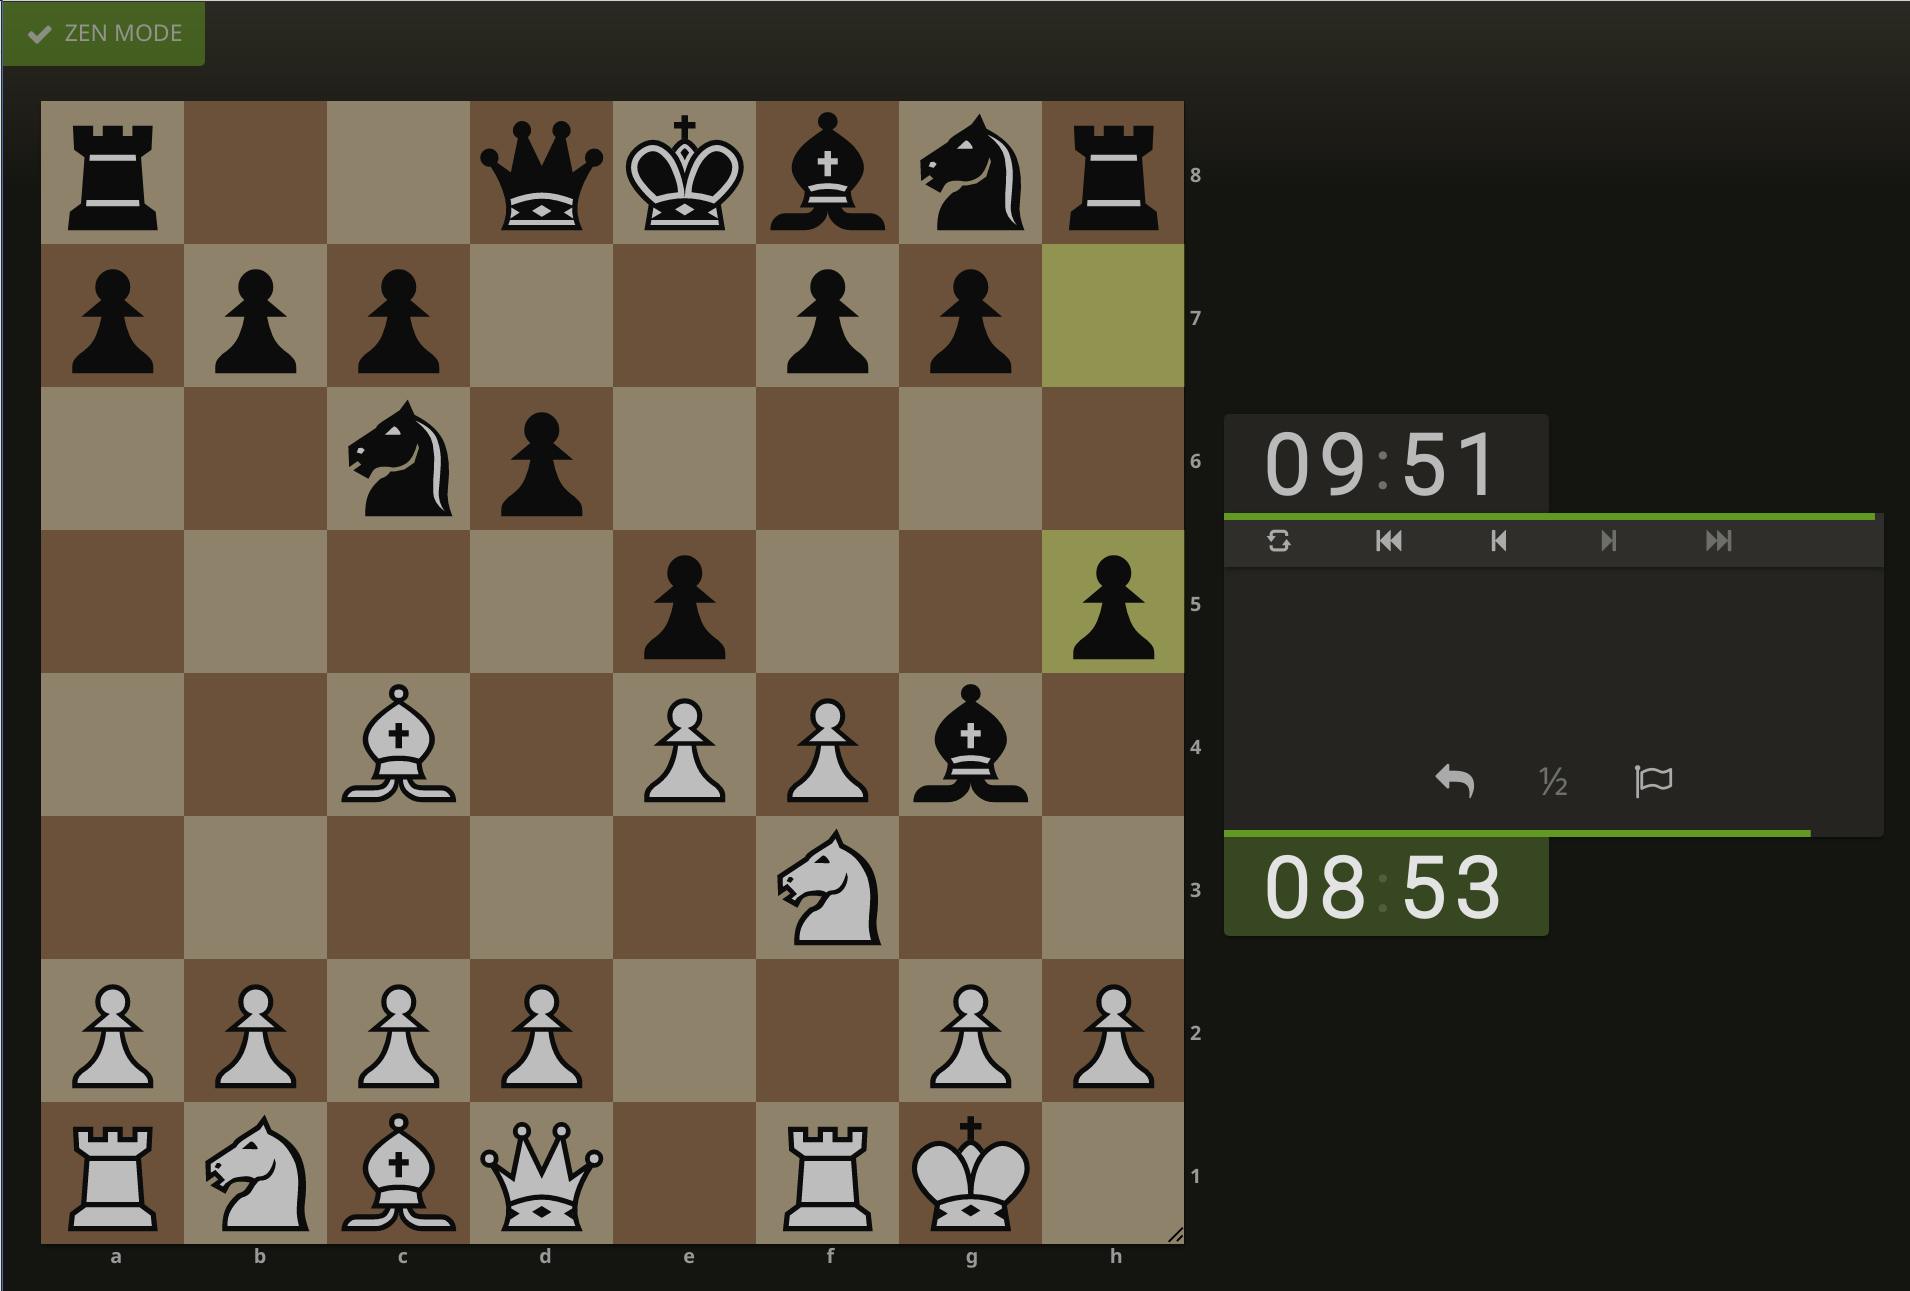 Puzzles by Theme on Lichess.org 